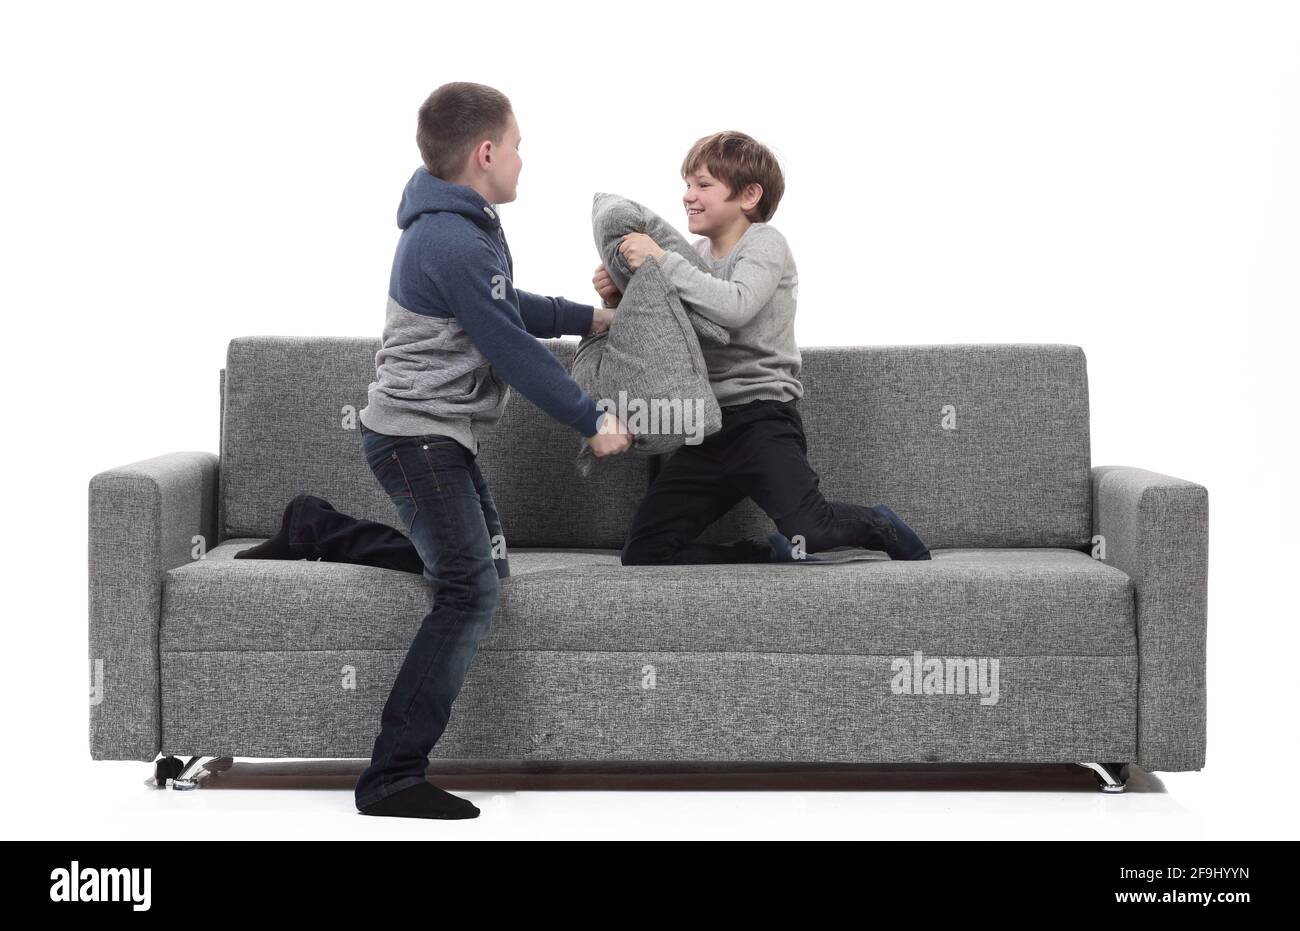 two brothers have a pillow fight on the couch. Stock Photo